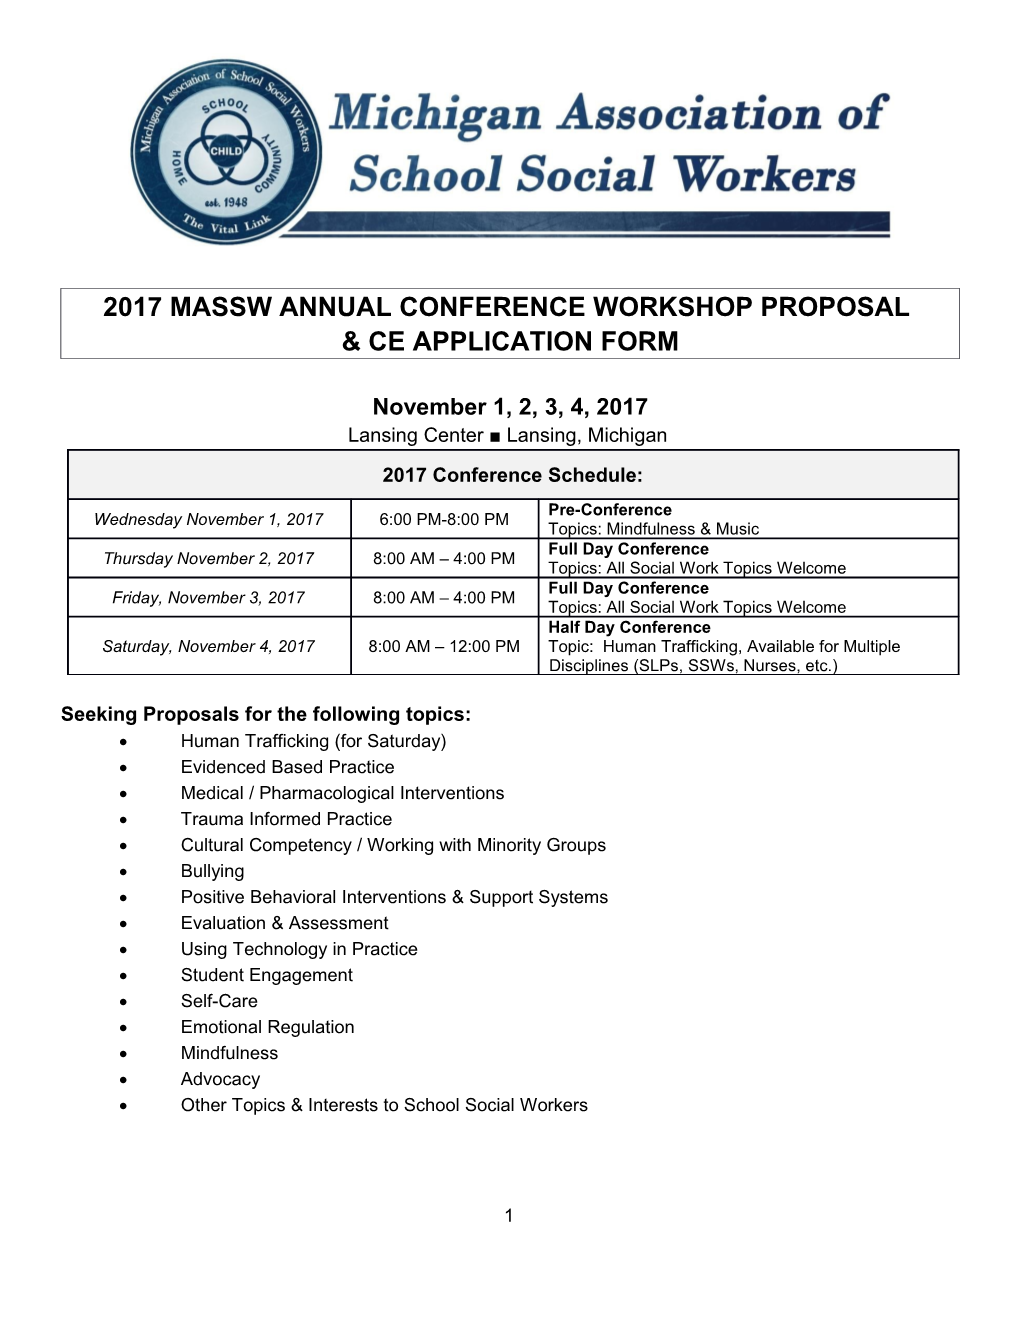 2017Massw Annual Conference Workshop Proposal